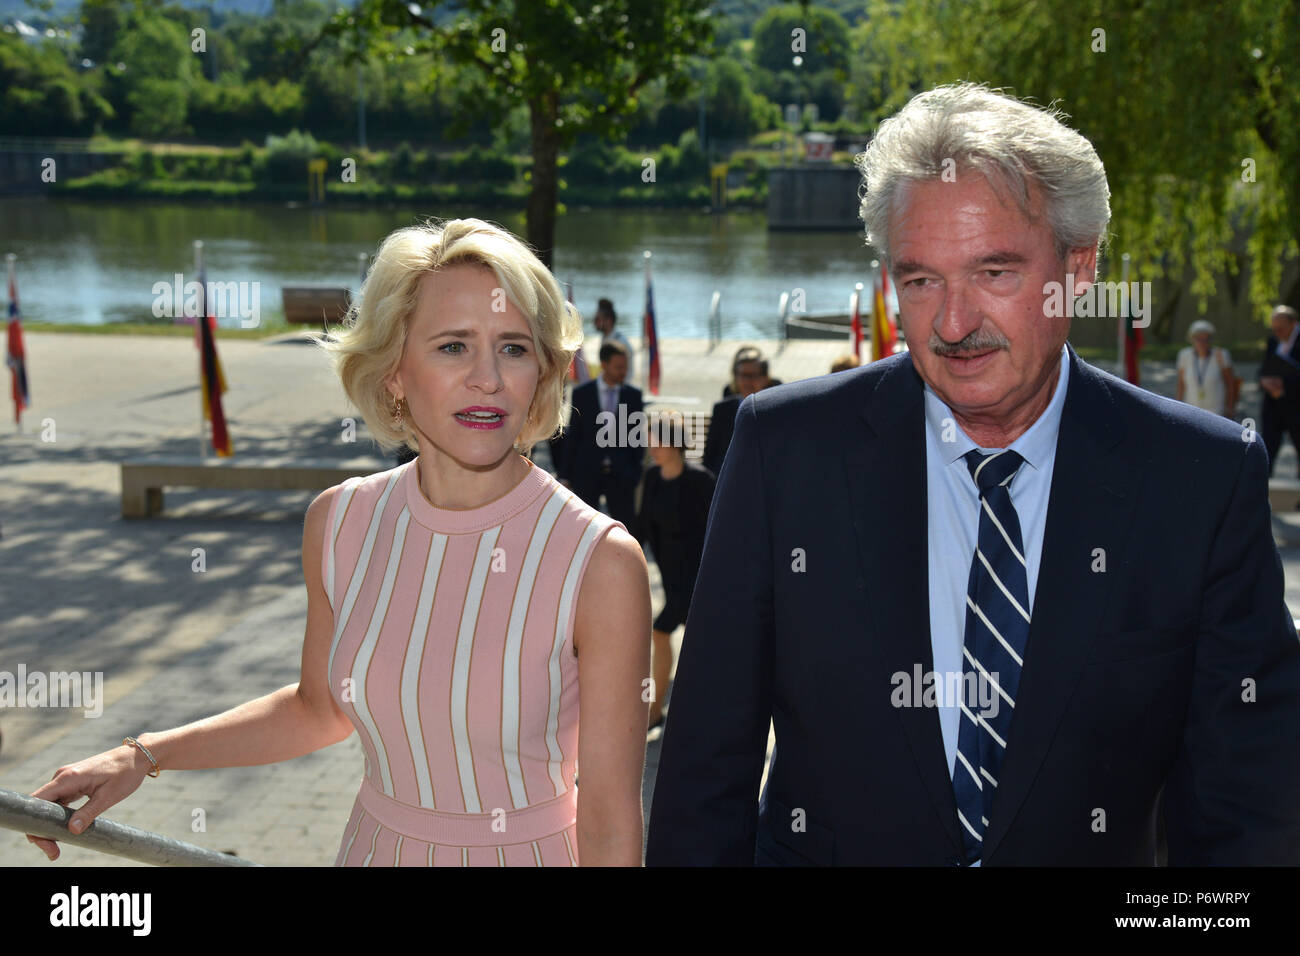 Schengen, Luxembourg. 03rd July, 2018. Liechenstein's Foreign Minister, Aurelia Frick, and Luxembourg's Foreign Minister, Jean Asselborn, speaking at the meeting of Foreign Ministers from German speaking countries. The focus of the meeting is on migration and protection of the Schengen area, the rule of law and the next EU financial framework. Credit: Harald Tittel/dpa/Alamy Live News Stock Photo